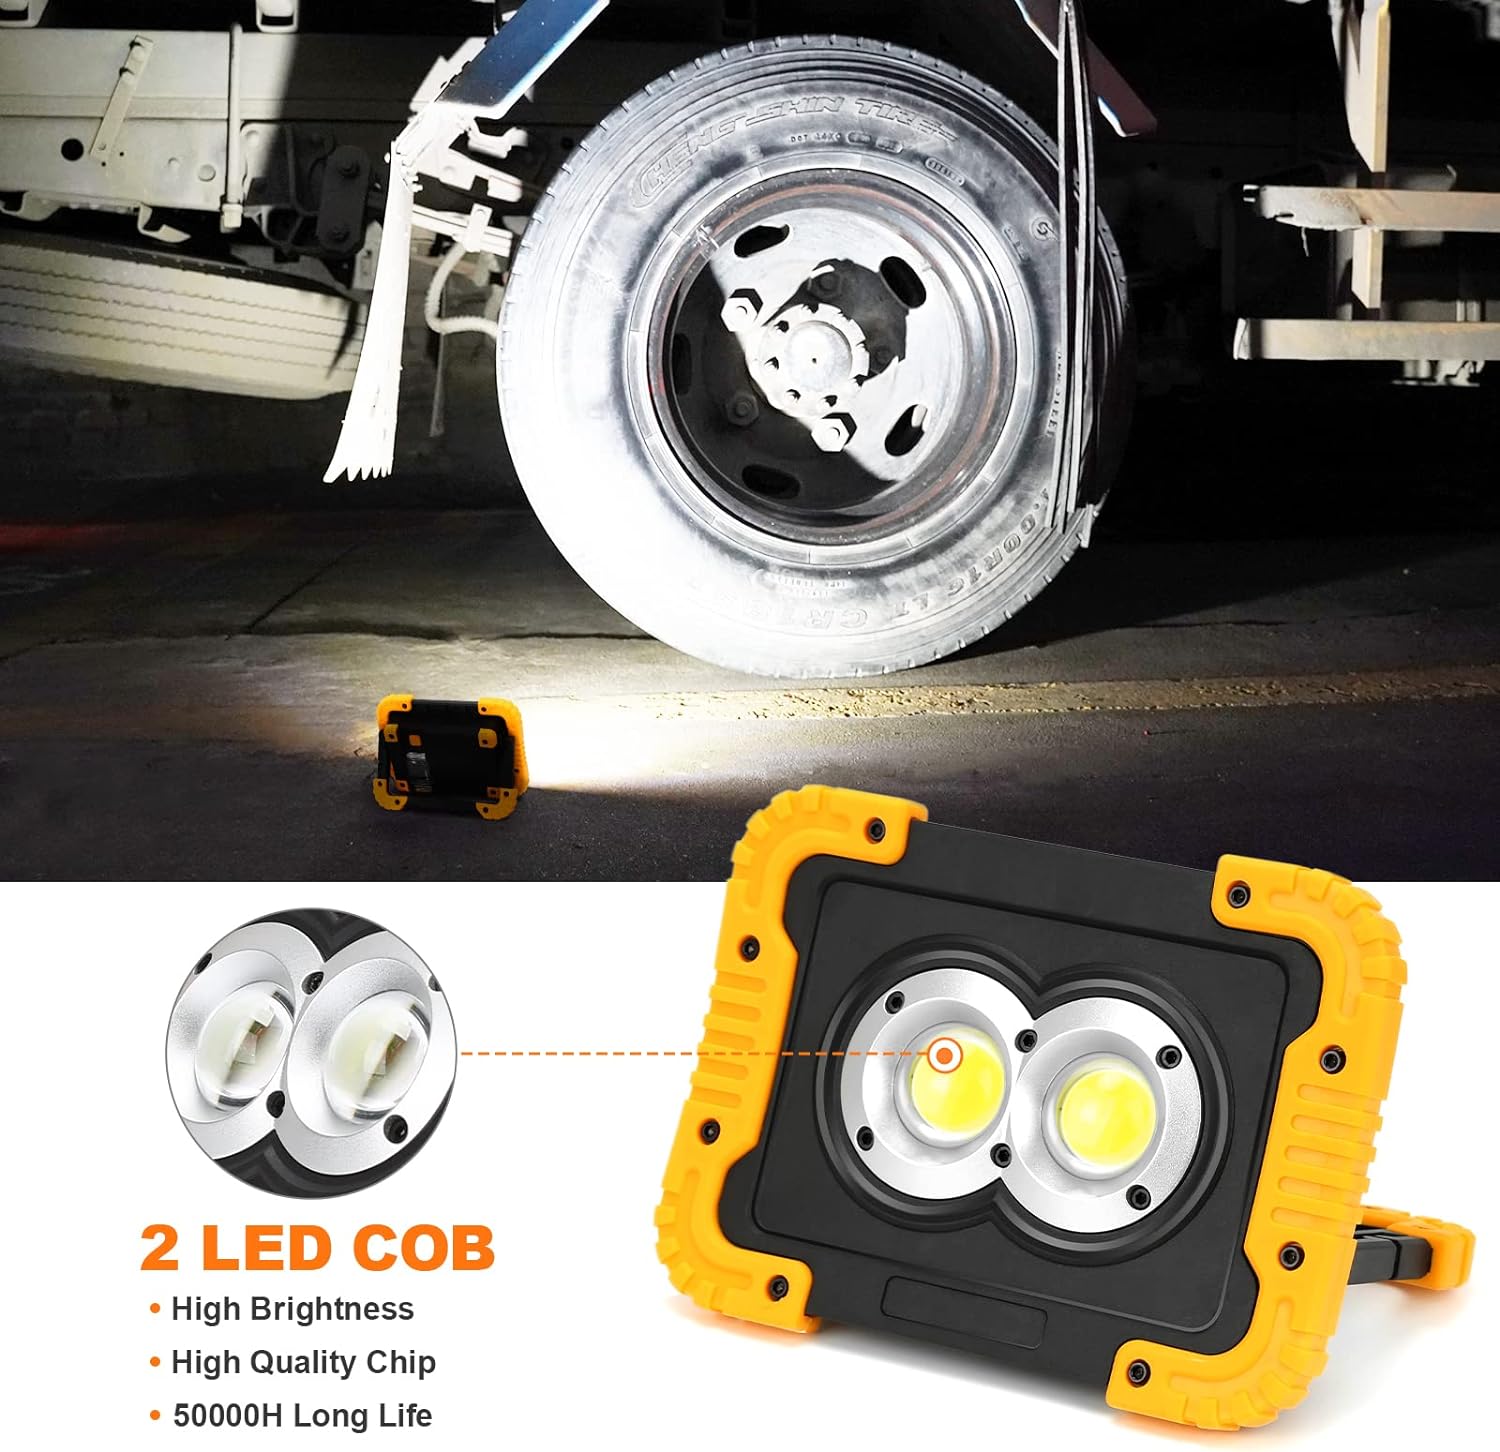 SUPAREE Rechargeable LED Work Lights with Spot & Flood COB for Cars Outdoor Camping Product description